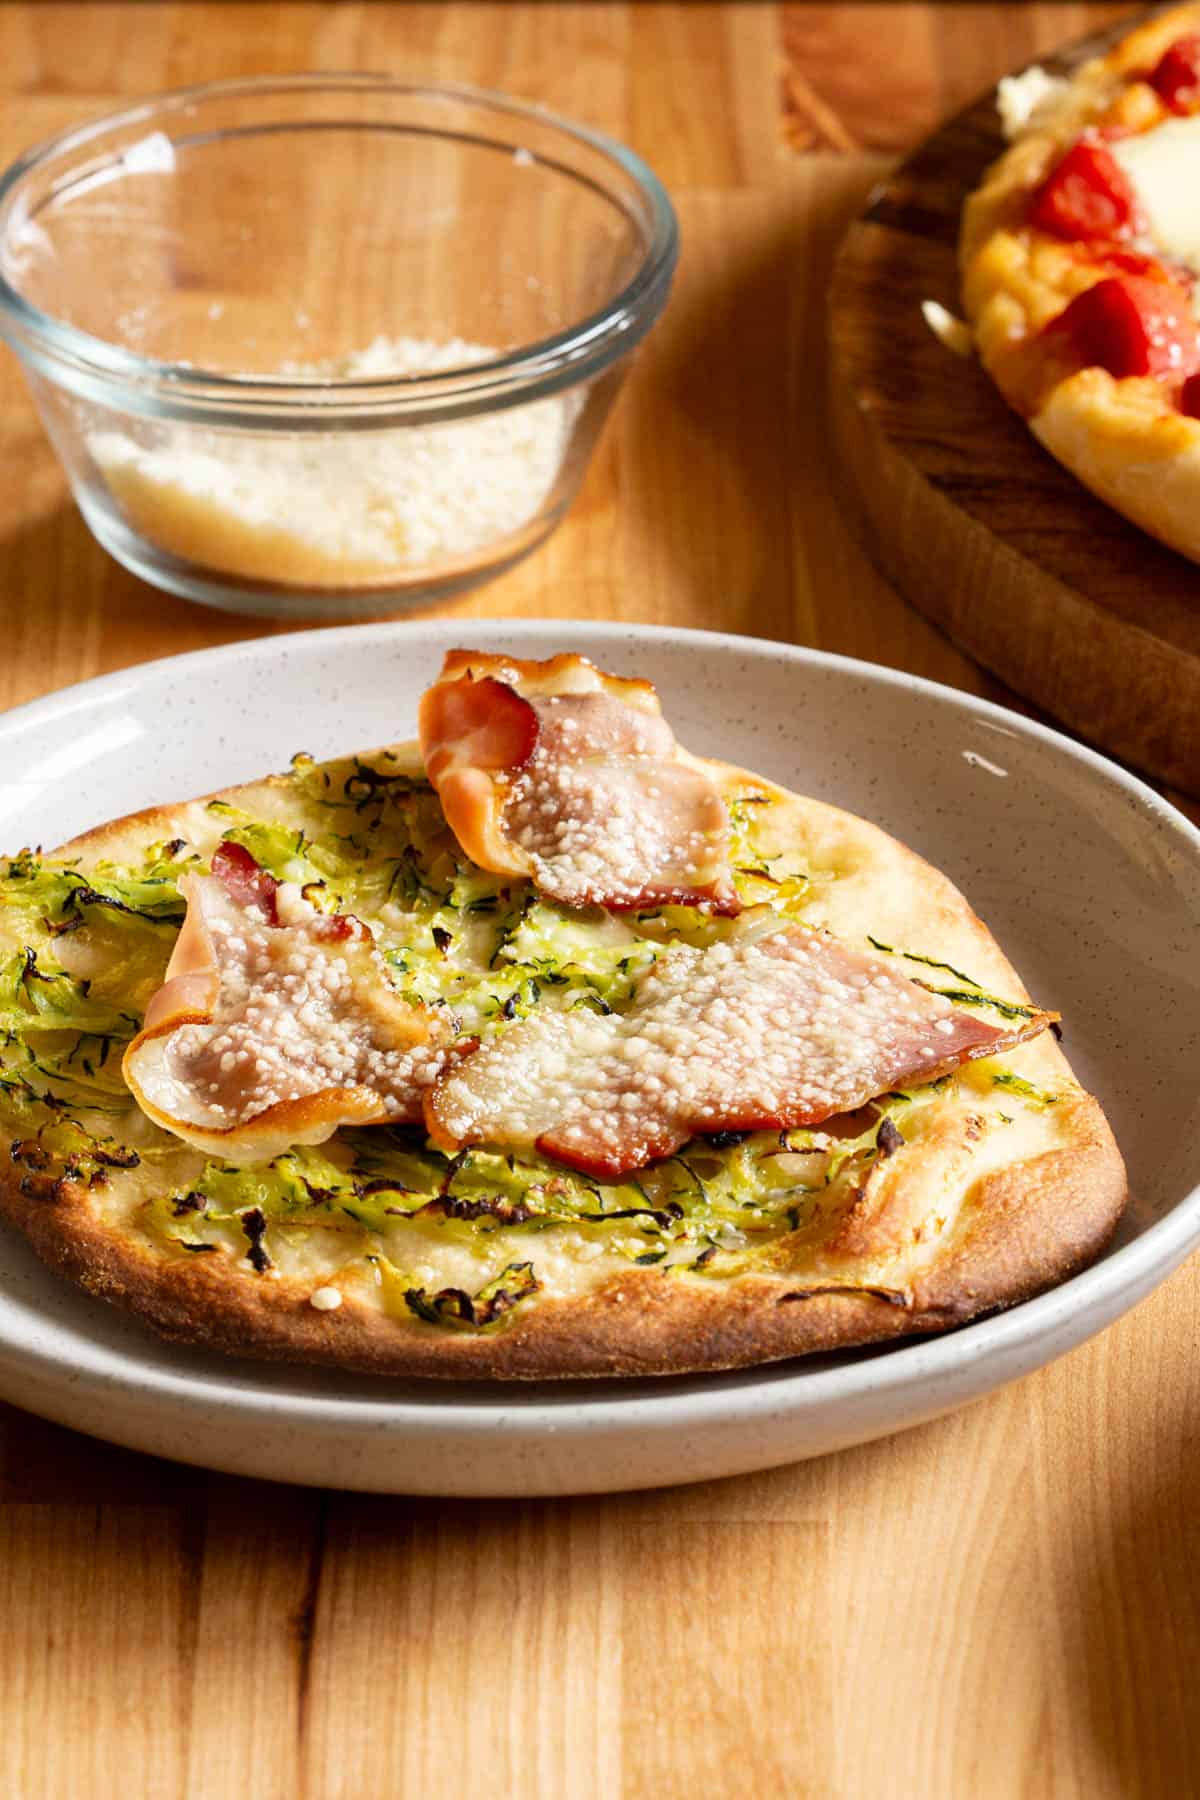 A small pizza with a prosciutto, Parmesan and zucchini topping.